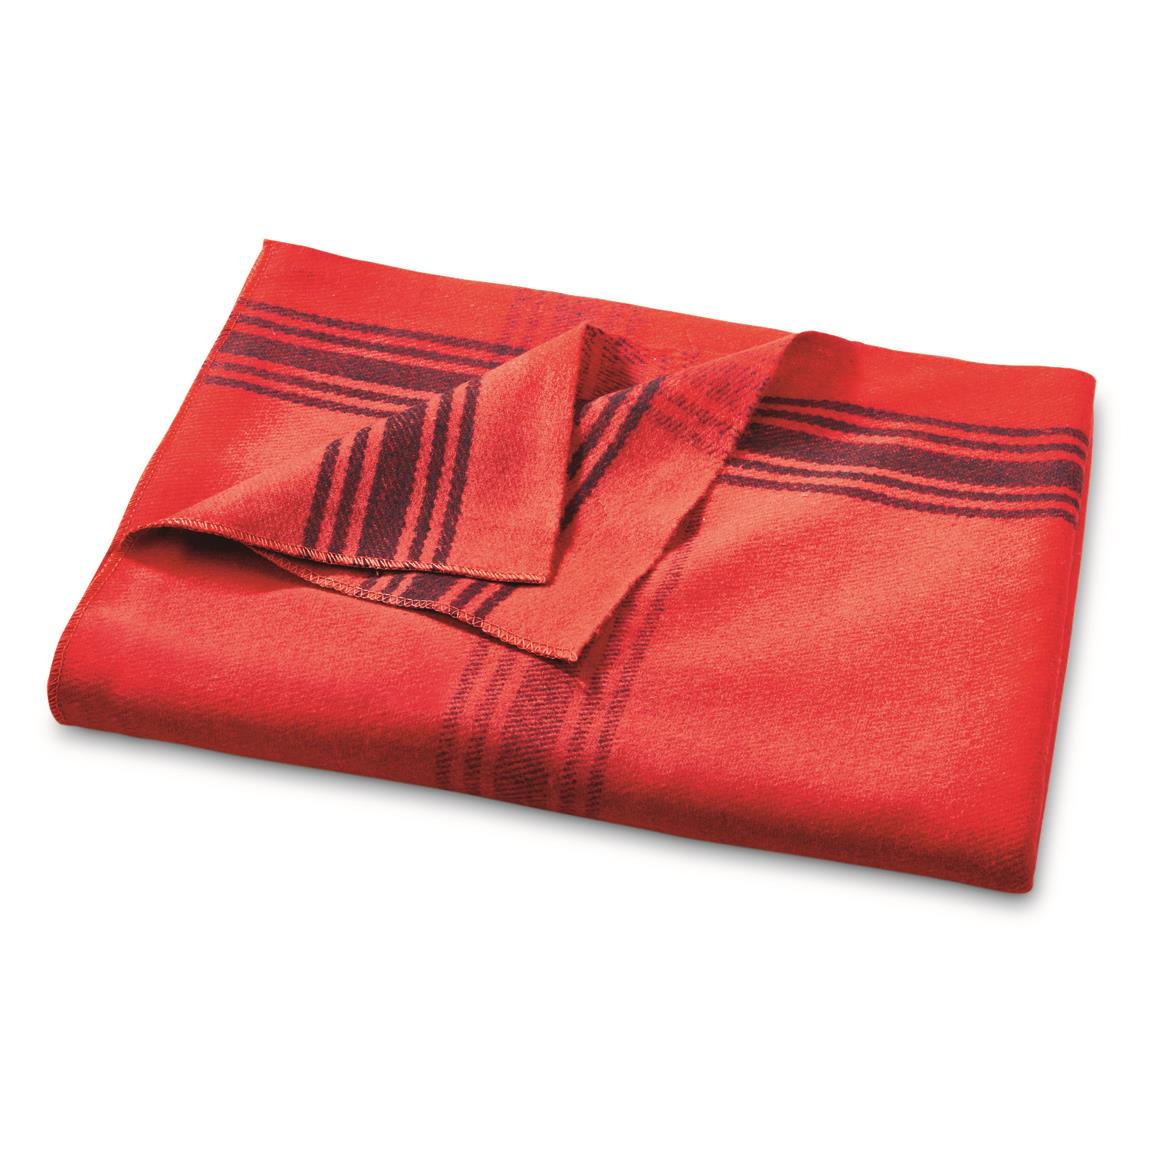 Fox Outdoors NATO Military Style Wool Blend Blanket, Red